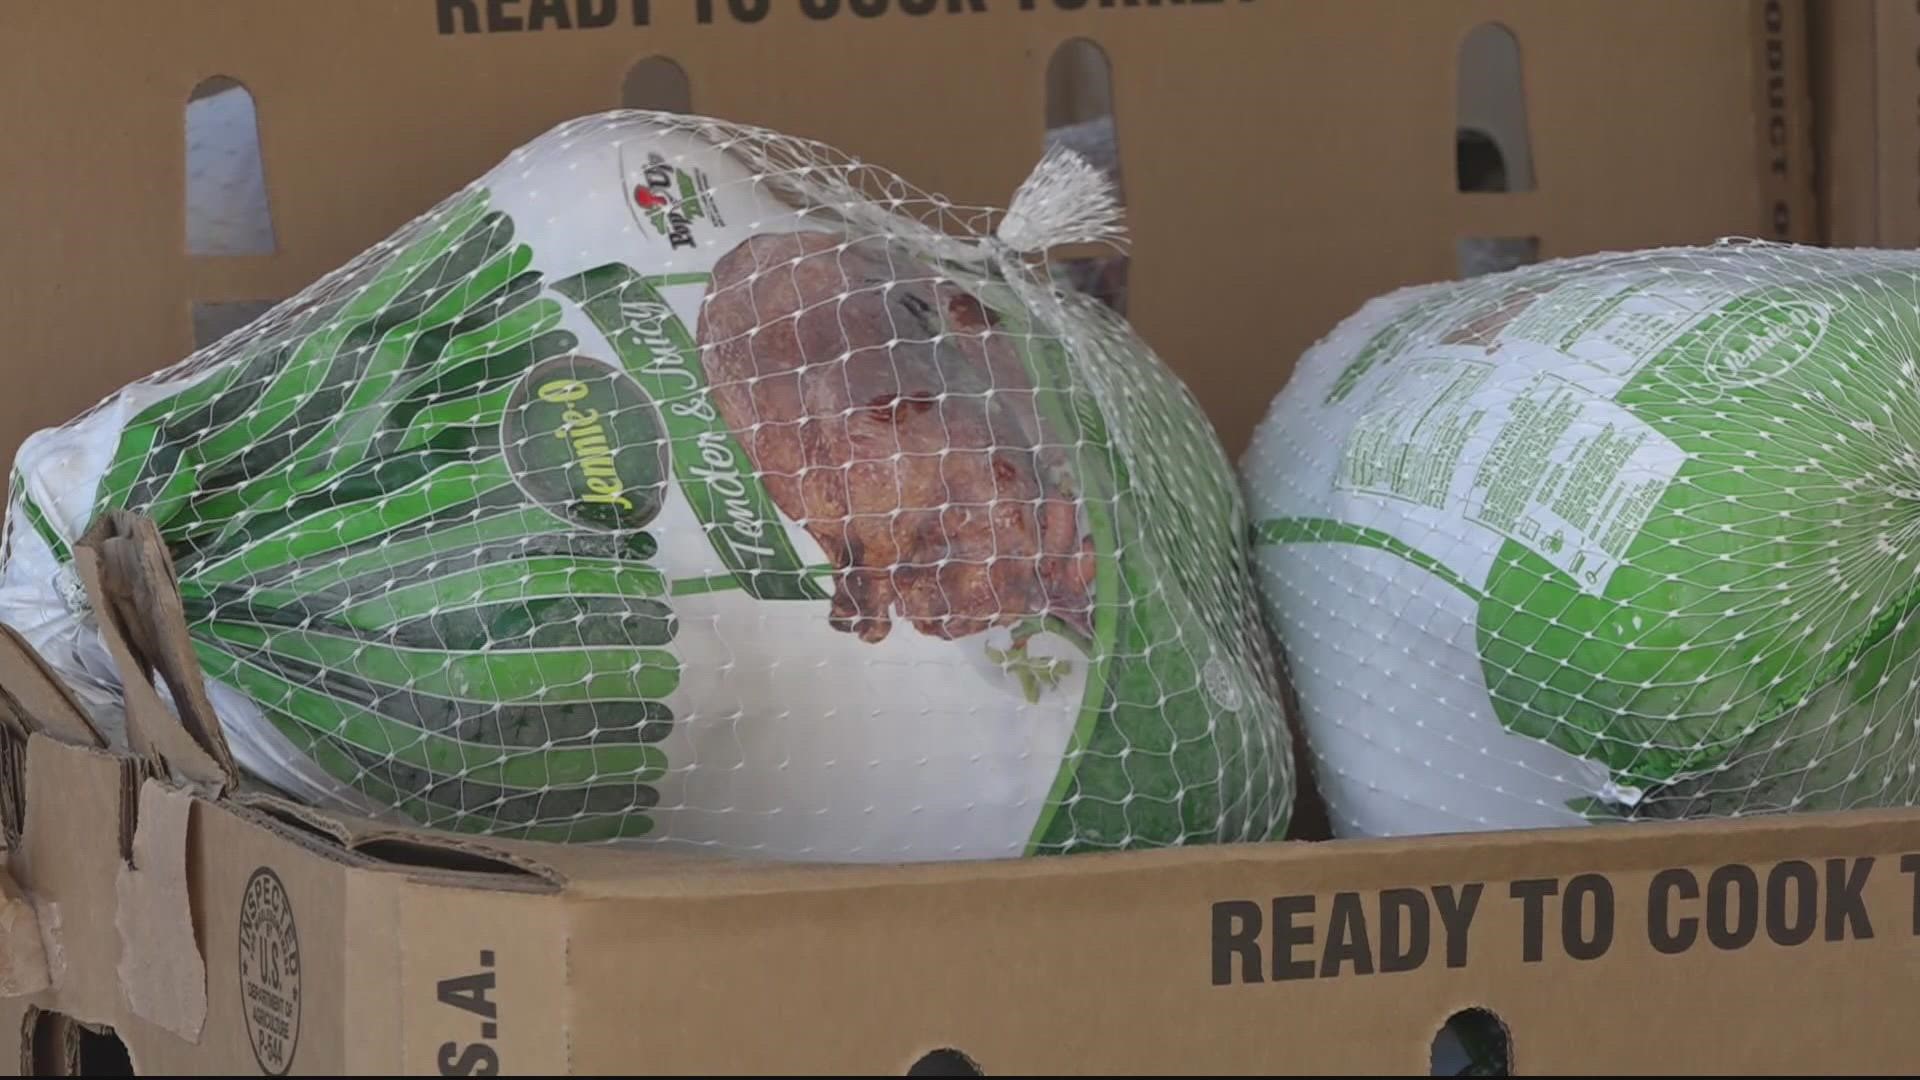 Arlington Food Assistance Center will once again see peak need ahead of the holiday season.